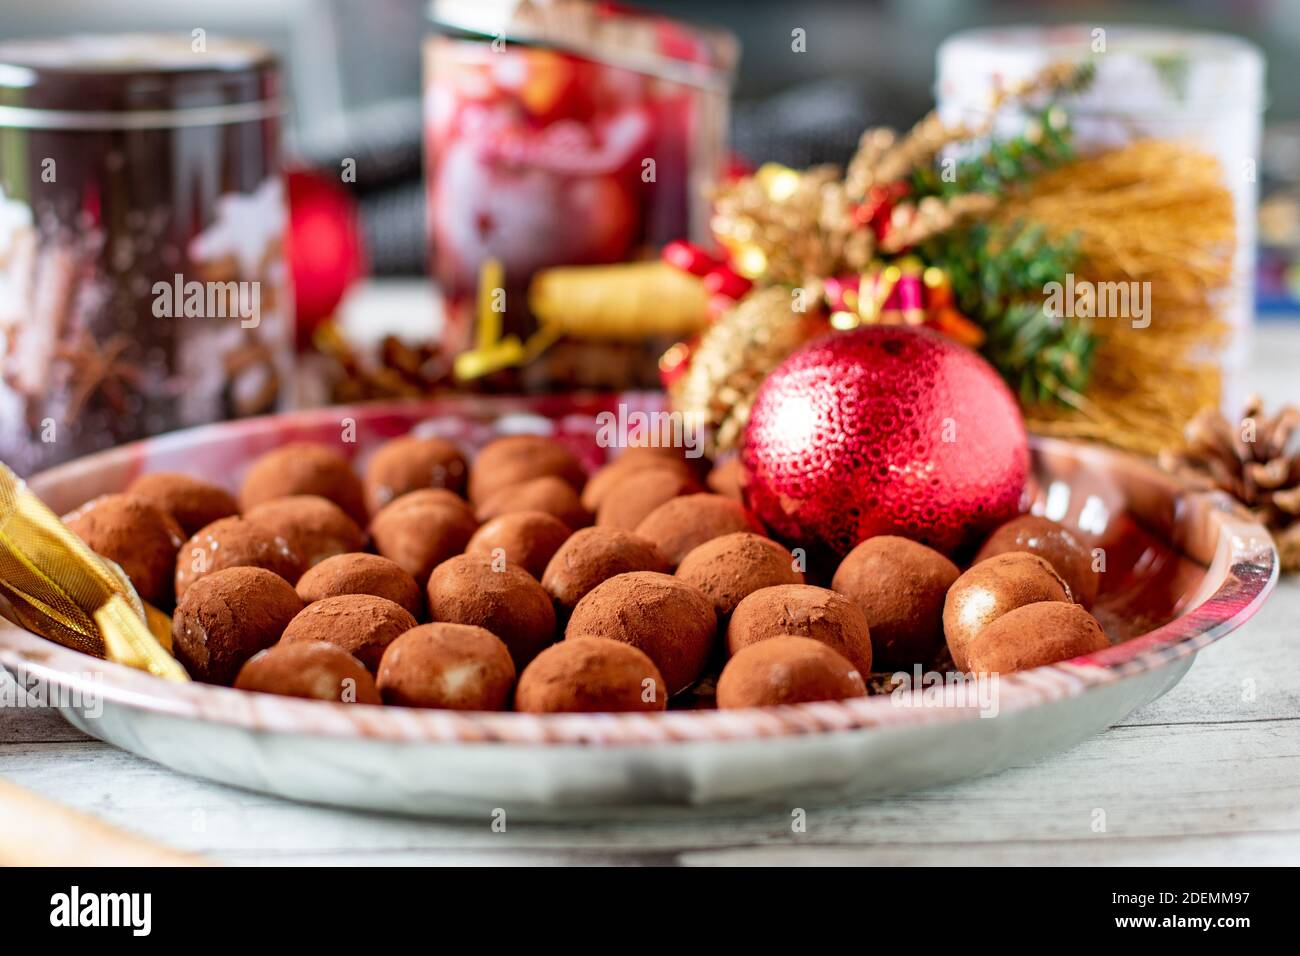 German Marzipan potatoes on a decorativ christmas plate with ornaments and cookie tins Stock Photo